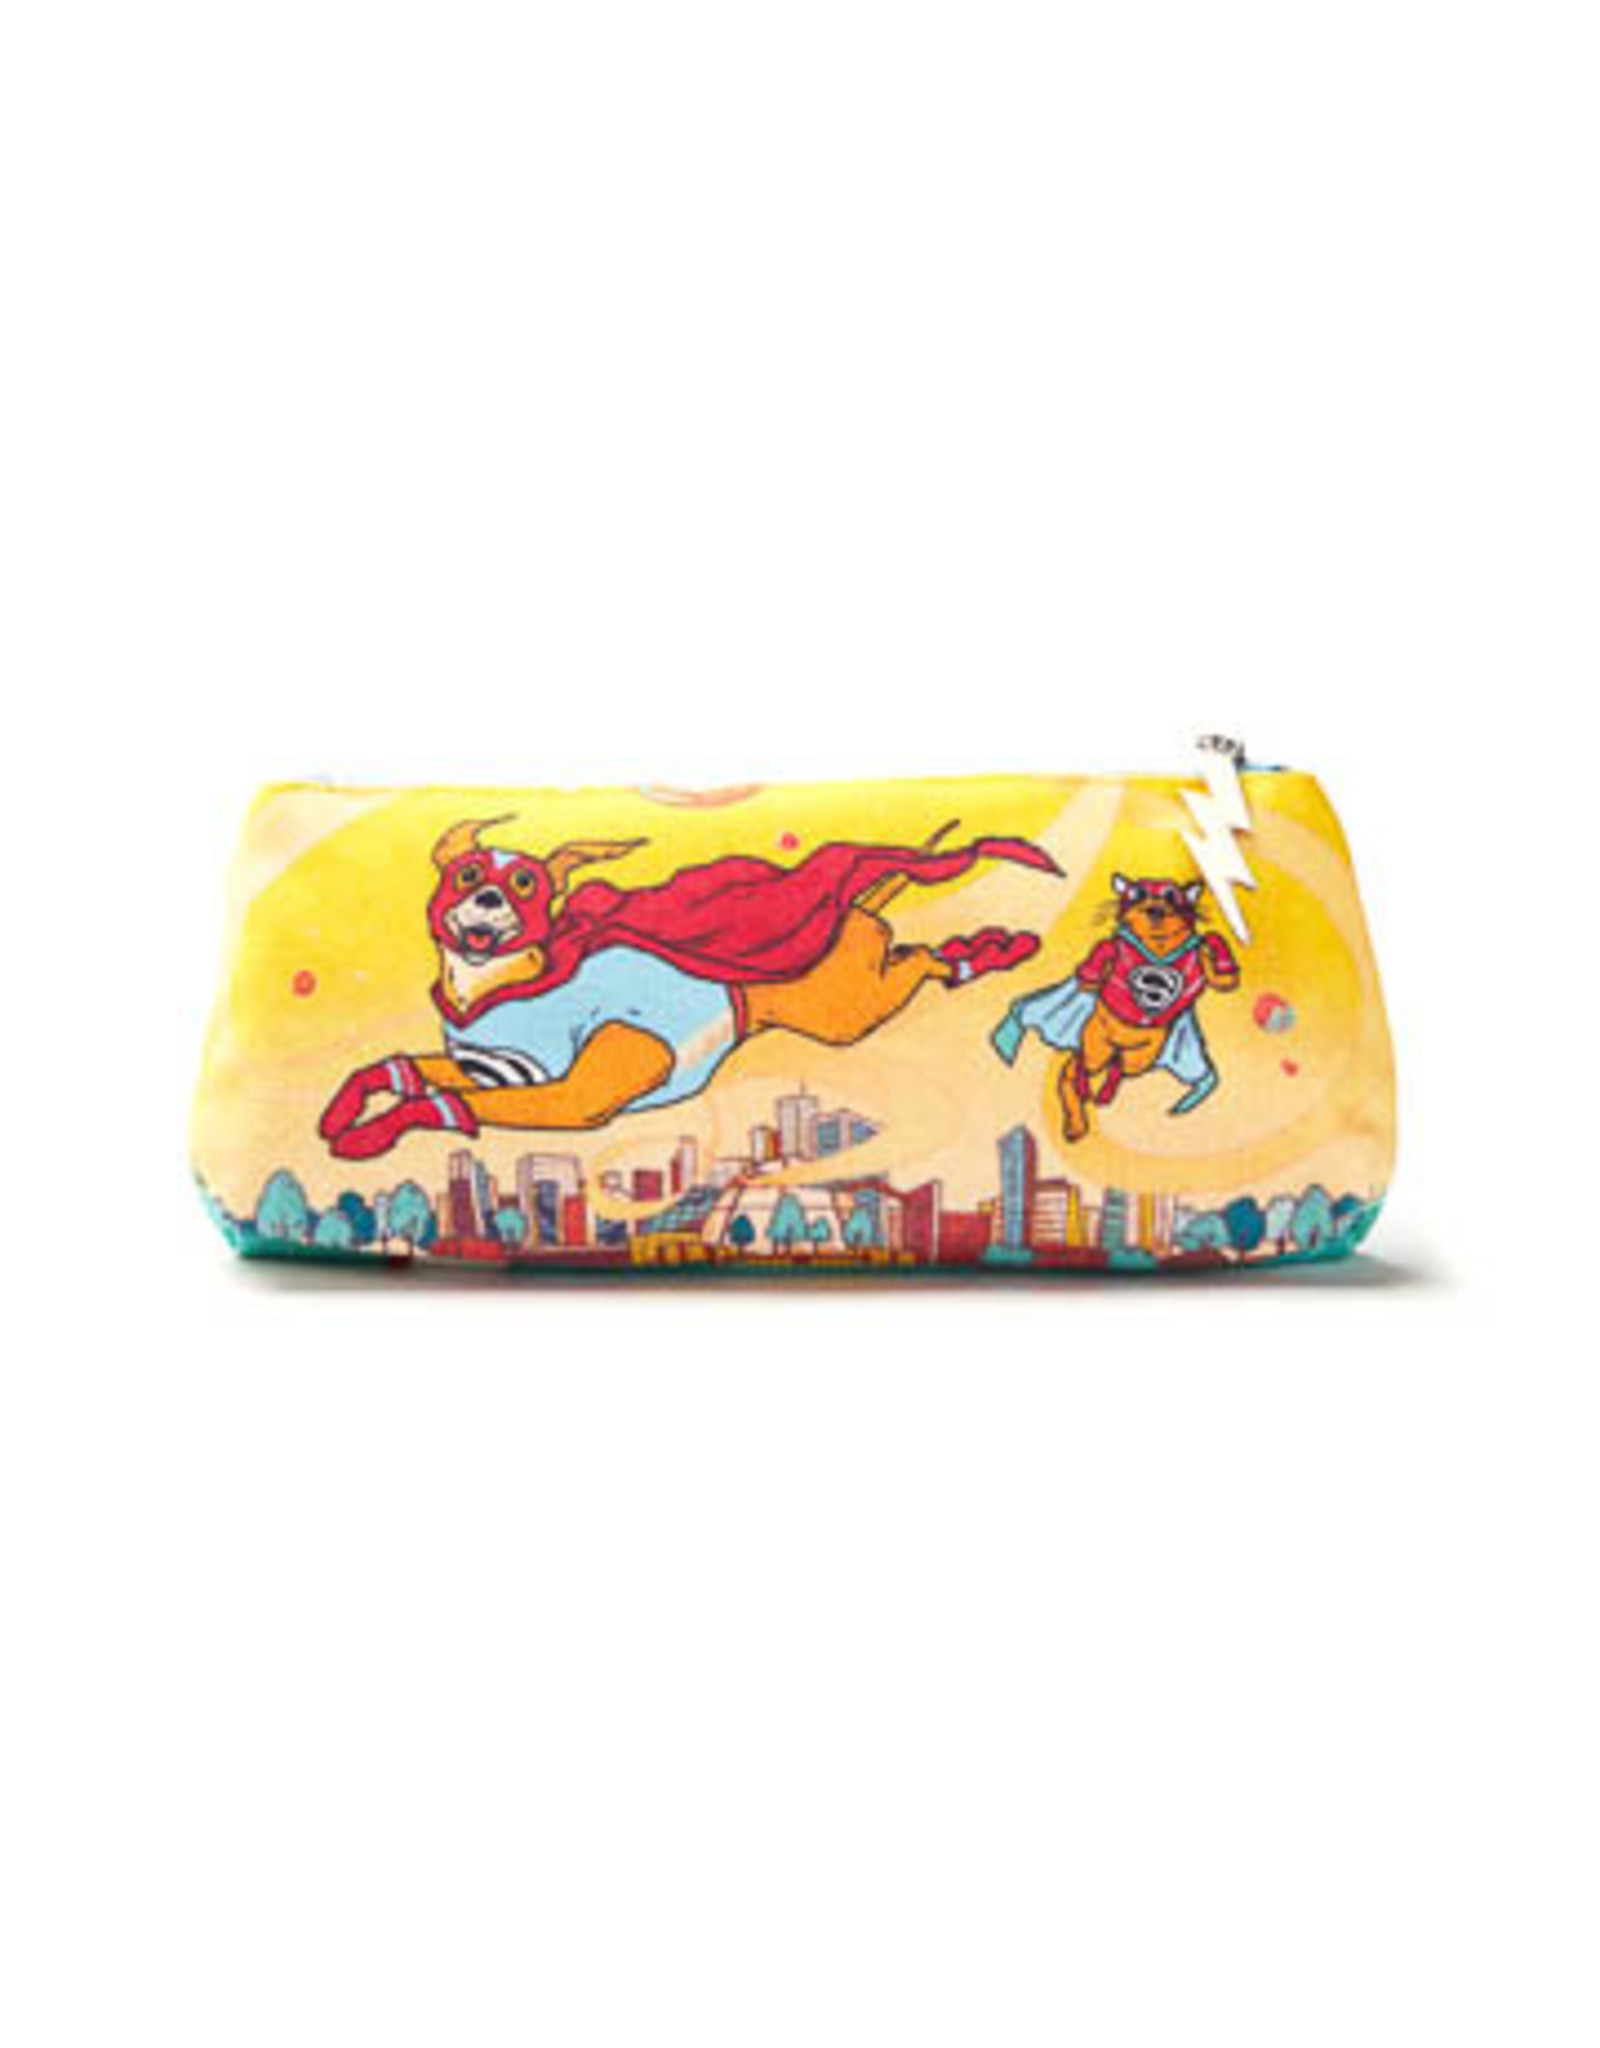 Compendium Superpowers Tool Kit Pencil Pouch